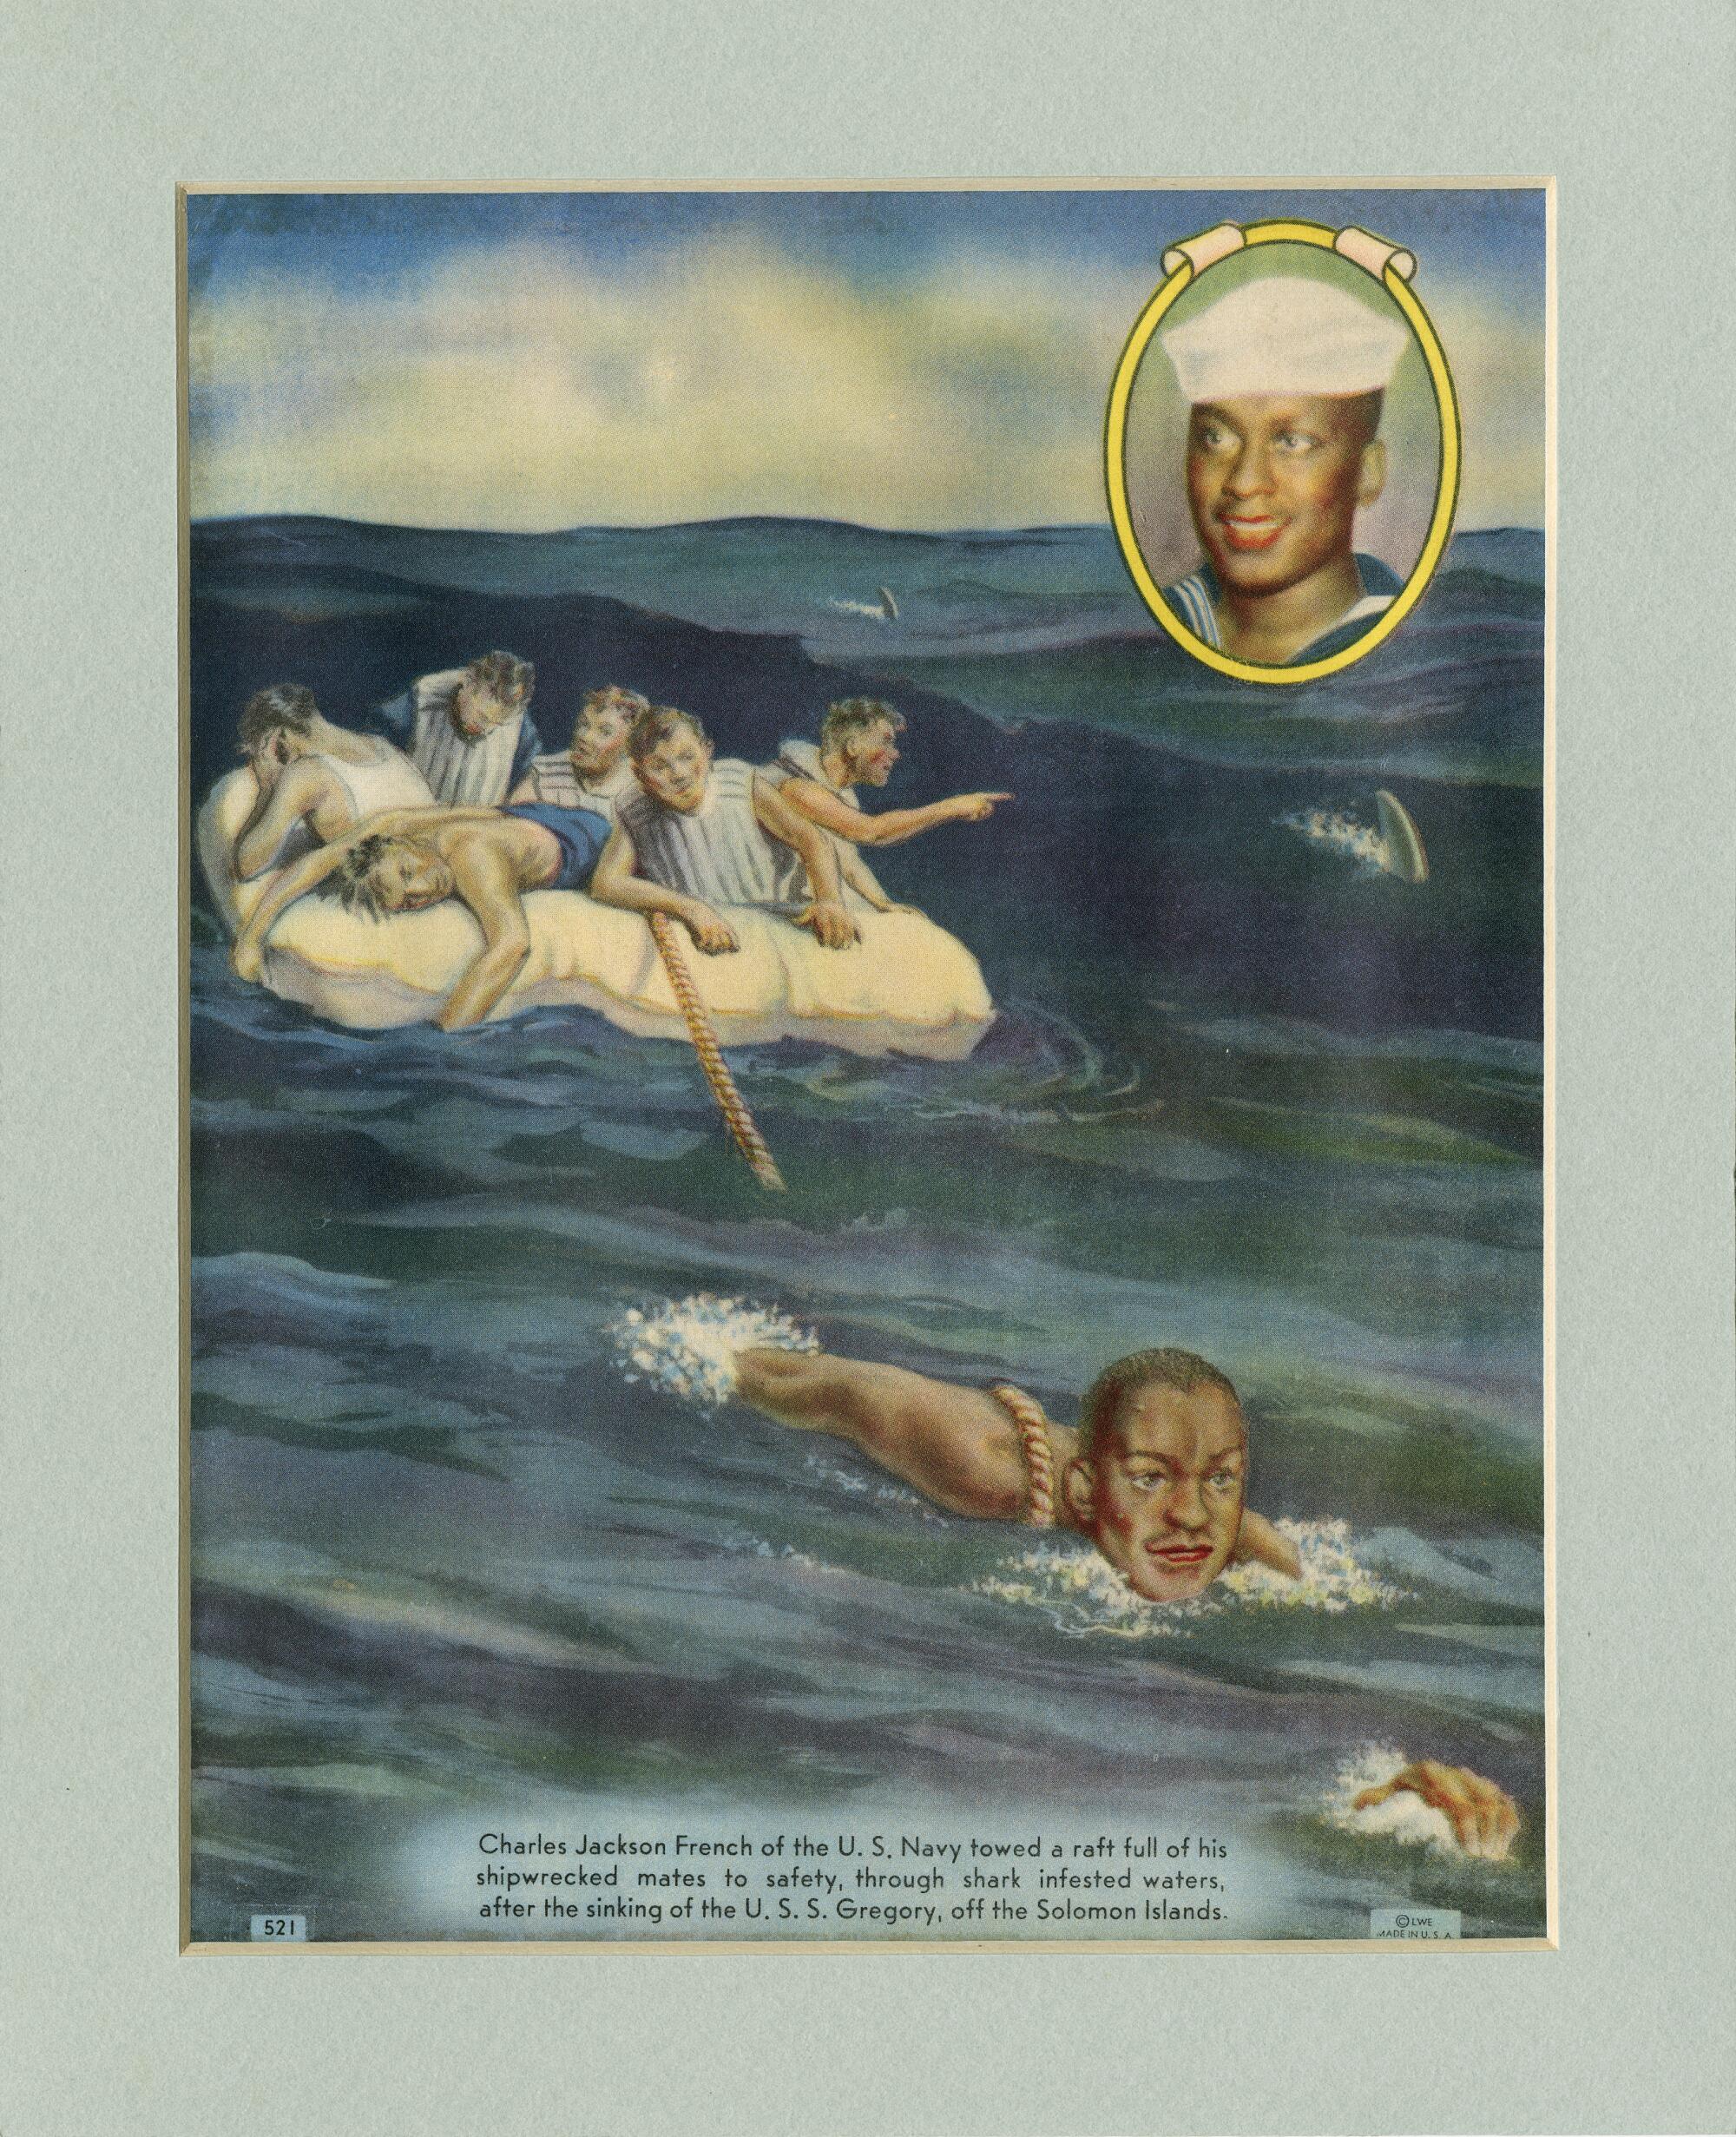 Illustration of a Black Navy sailor towing a raft of shipwrecked mates in the water while sharks swam nearby.